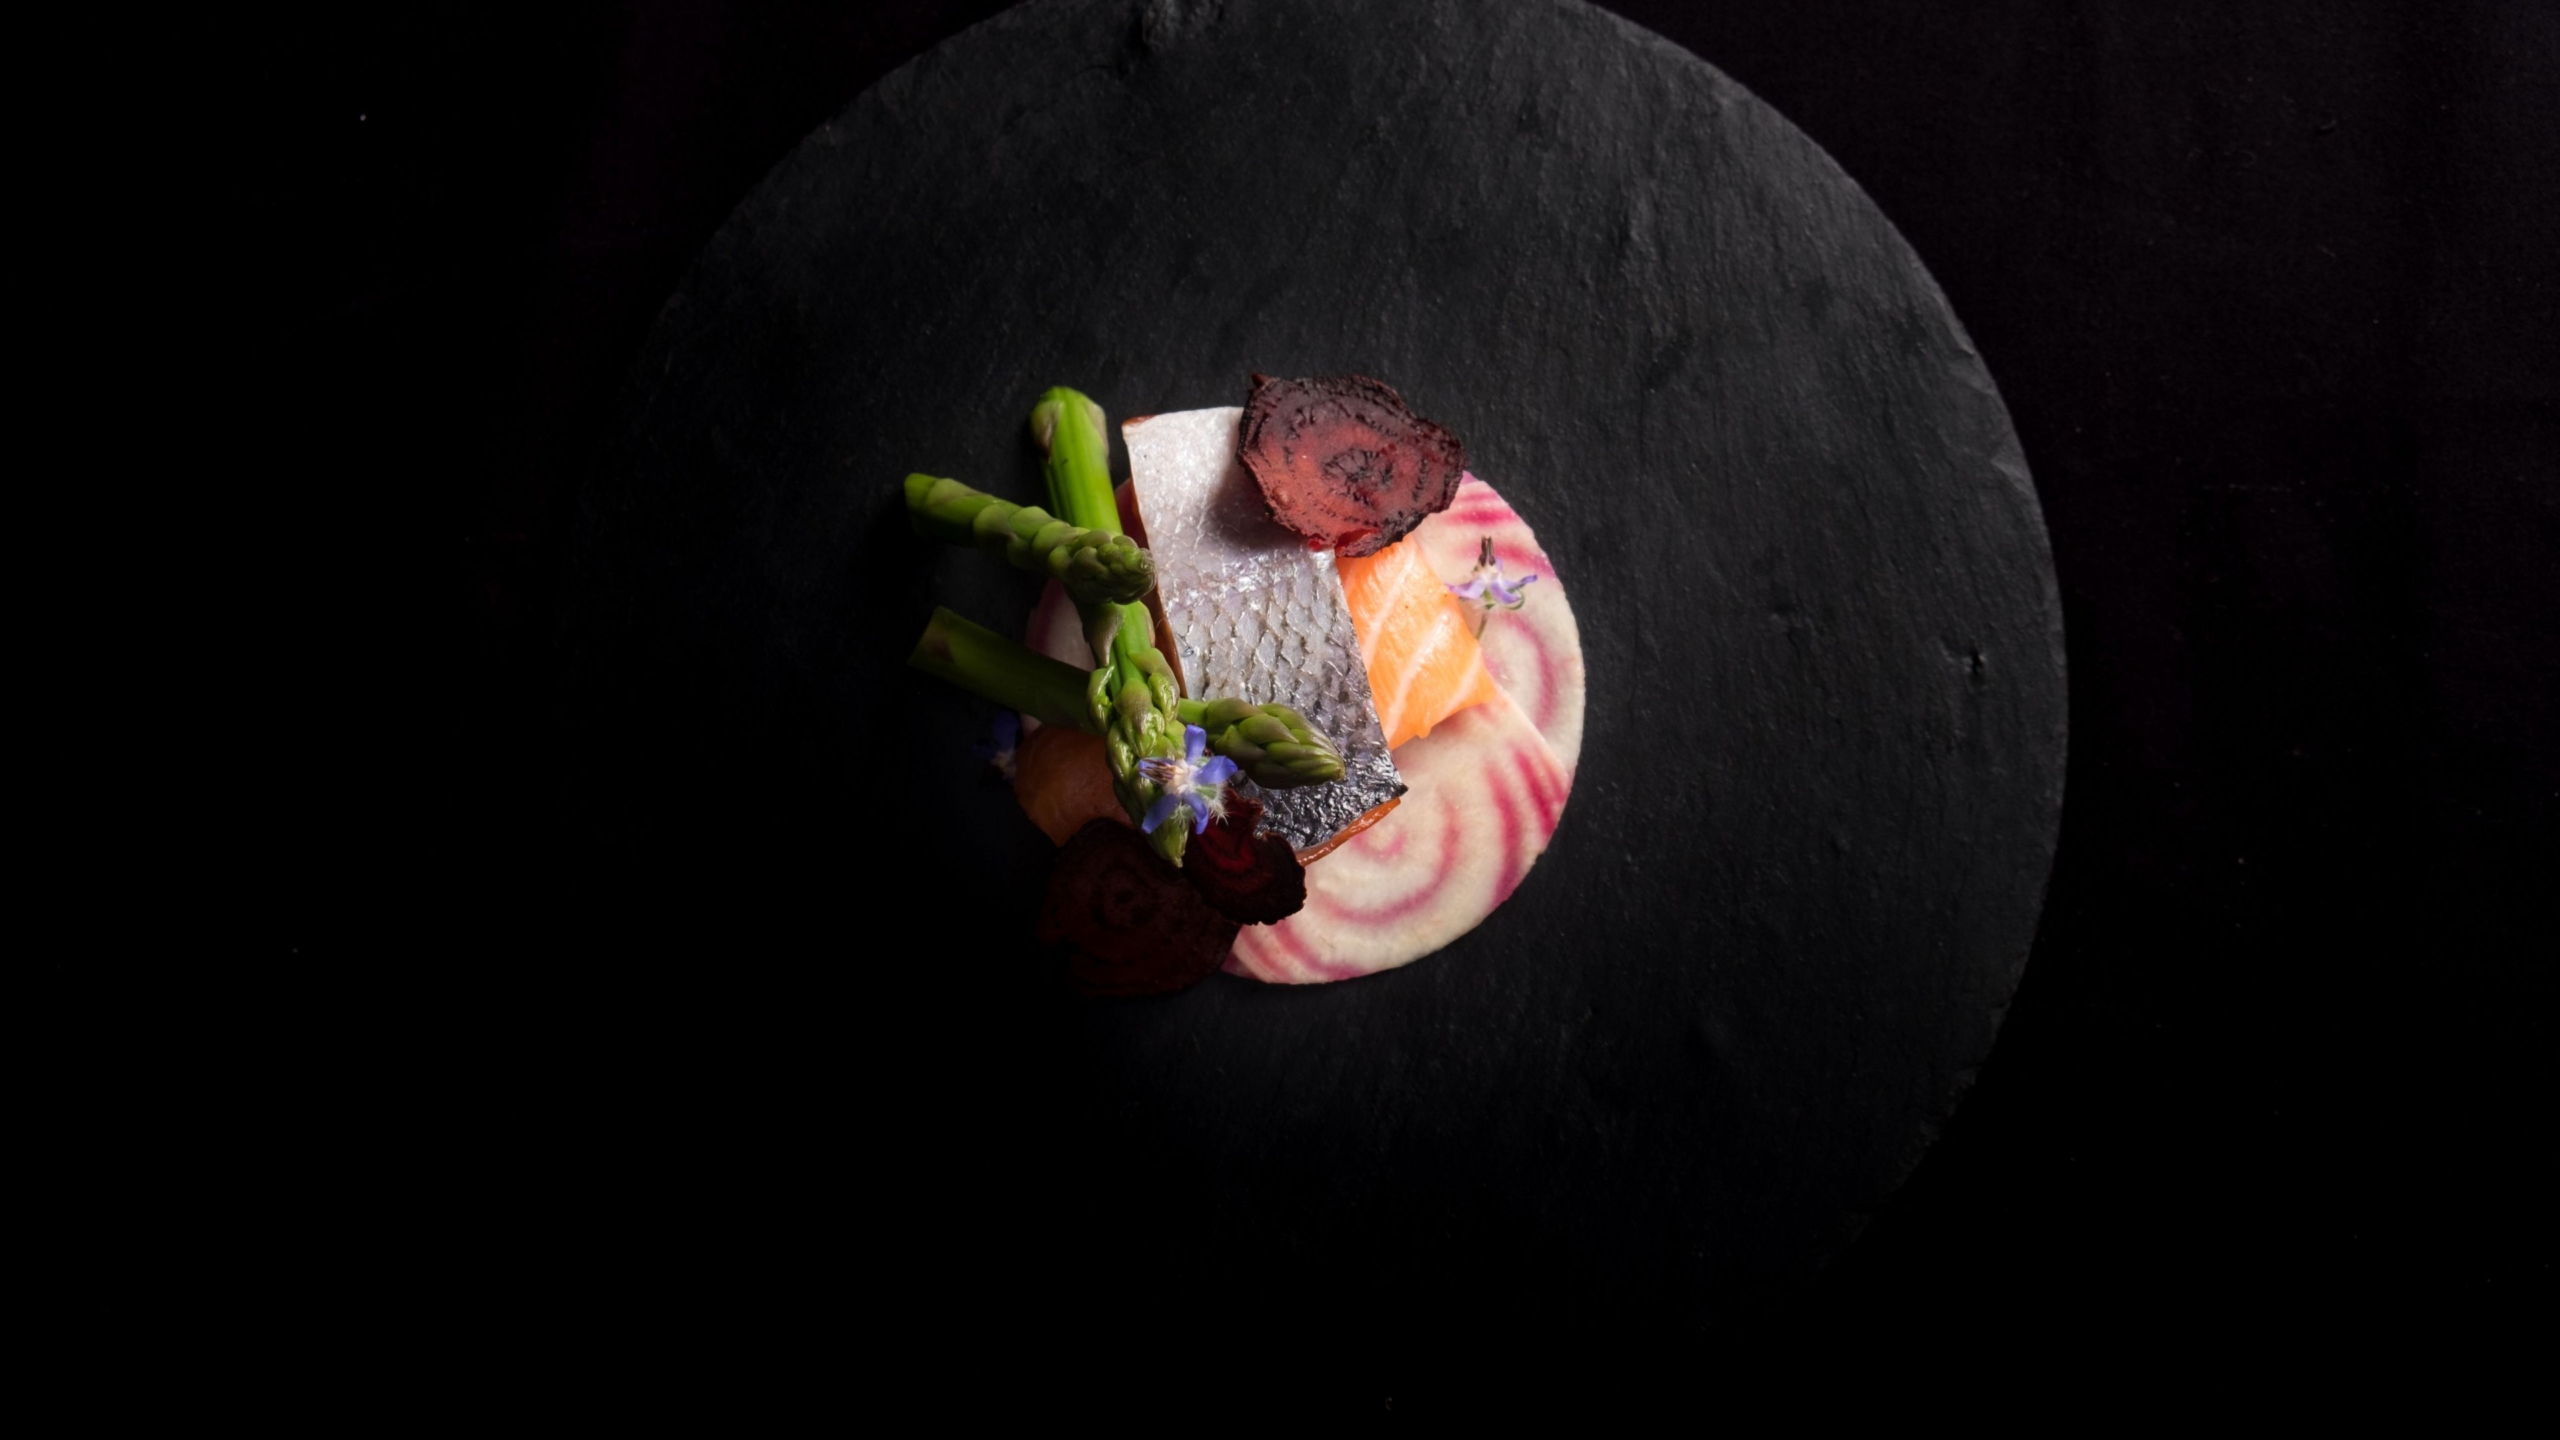 vibrant food on a black plate surrounded by darkness